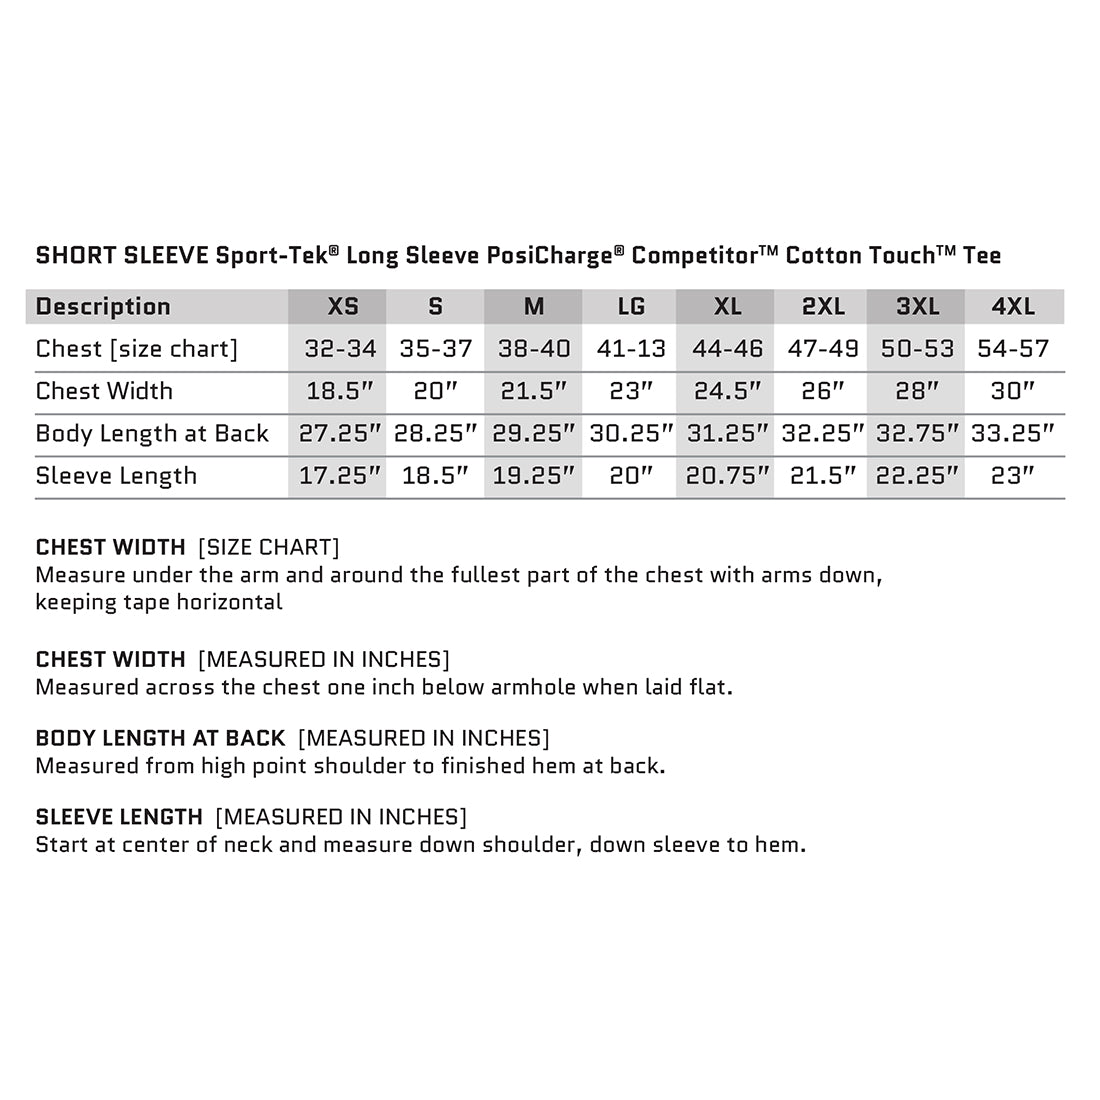 Sizing chart for men's light-weight Sport-Tek® Short Sleeve PosiCharge® Competitor™ Cotton Touch™ Tee shirt. Sizes XS through 4XL. Descriptions of Chest (size chart), Chest Width, Body Length at Back and Sleeve Length per size.